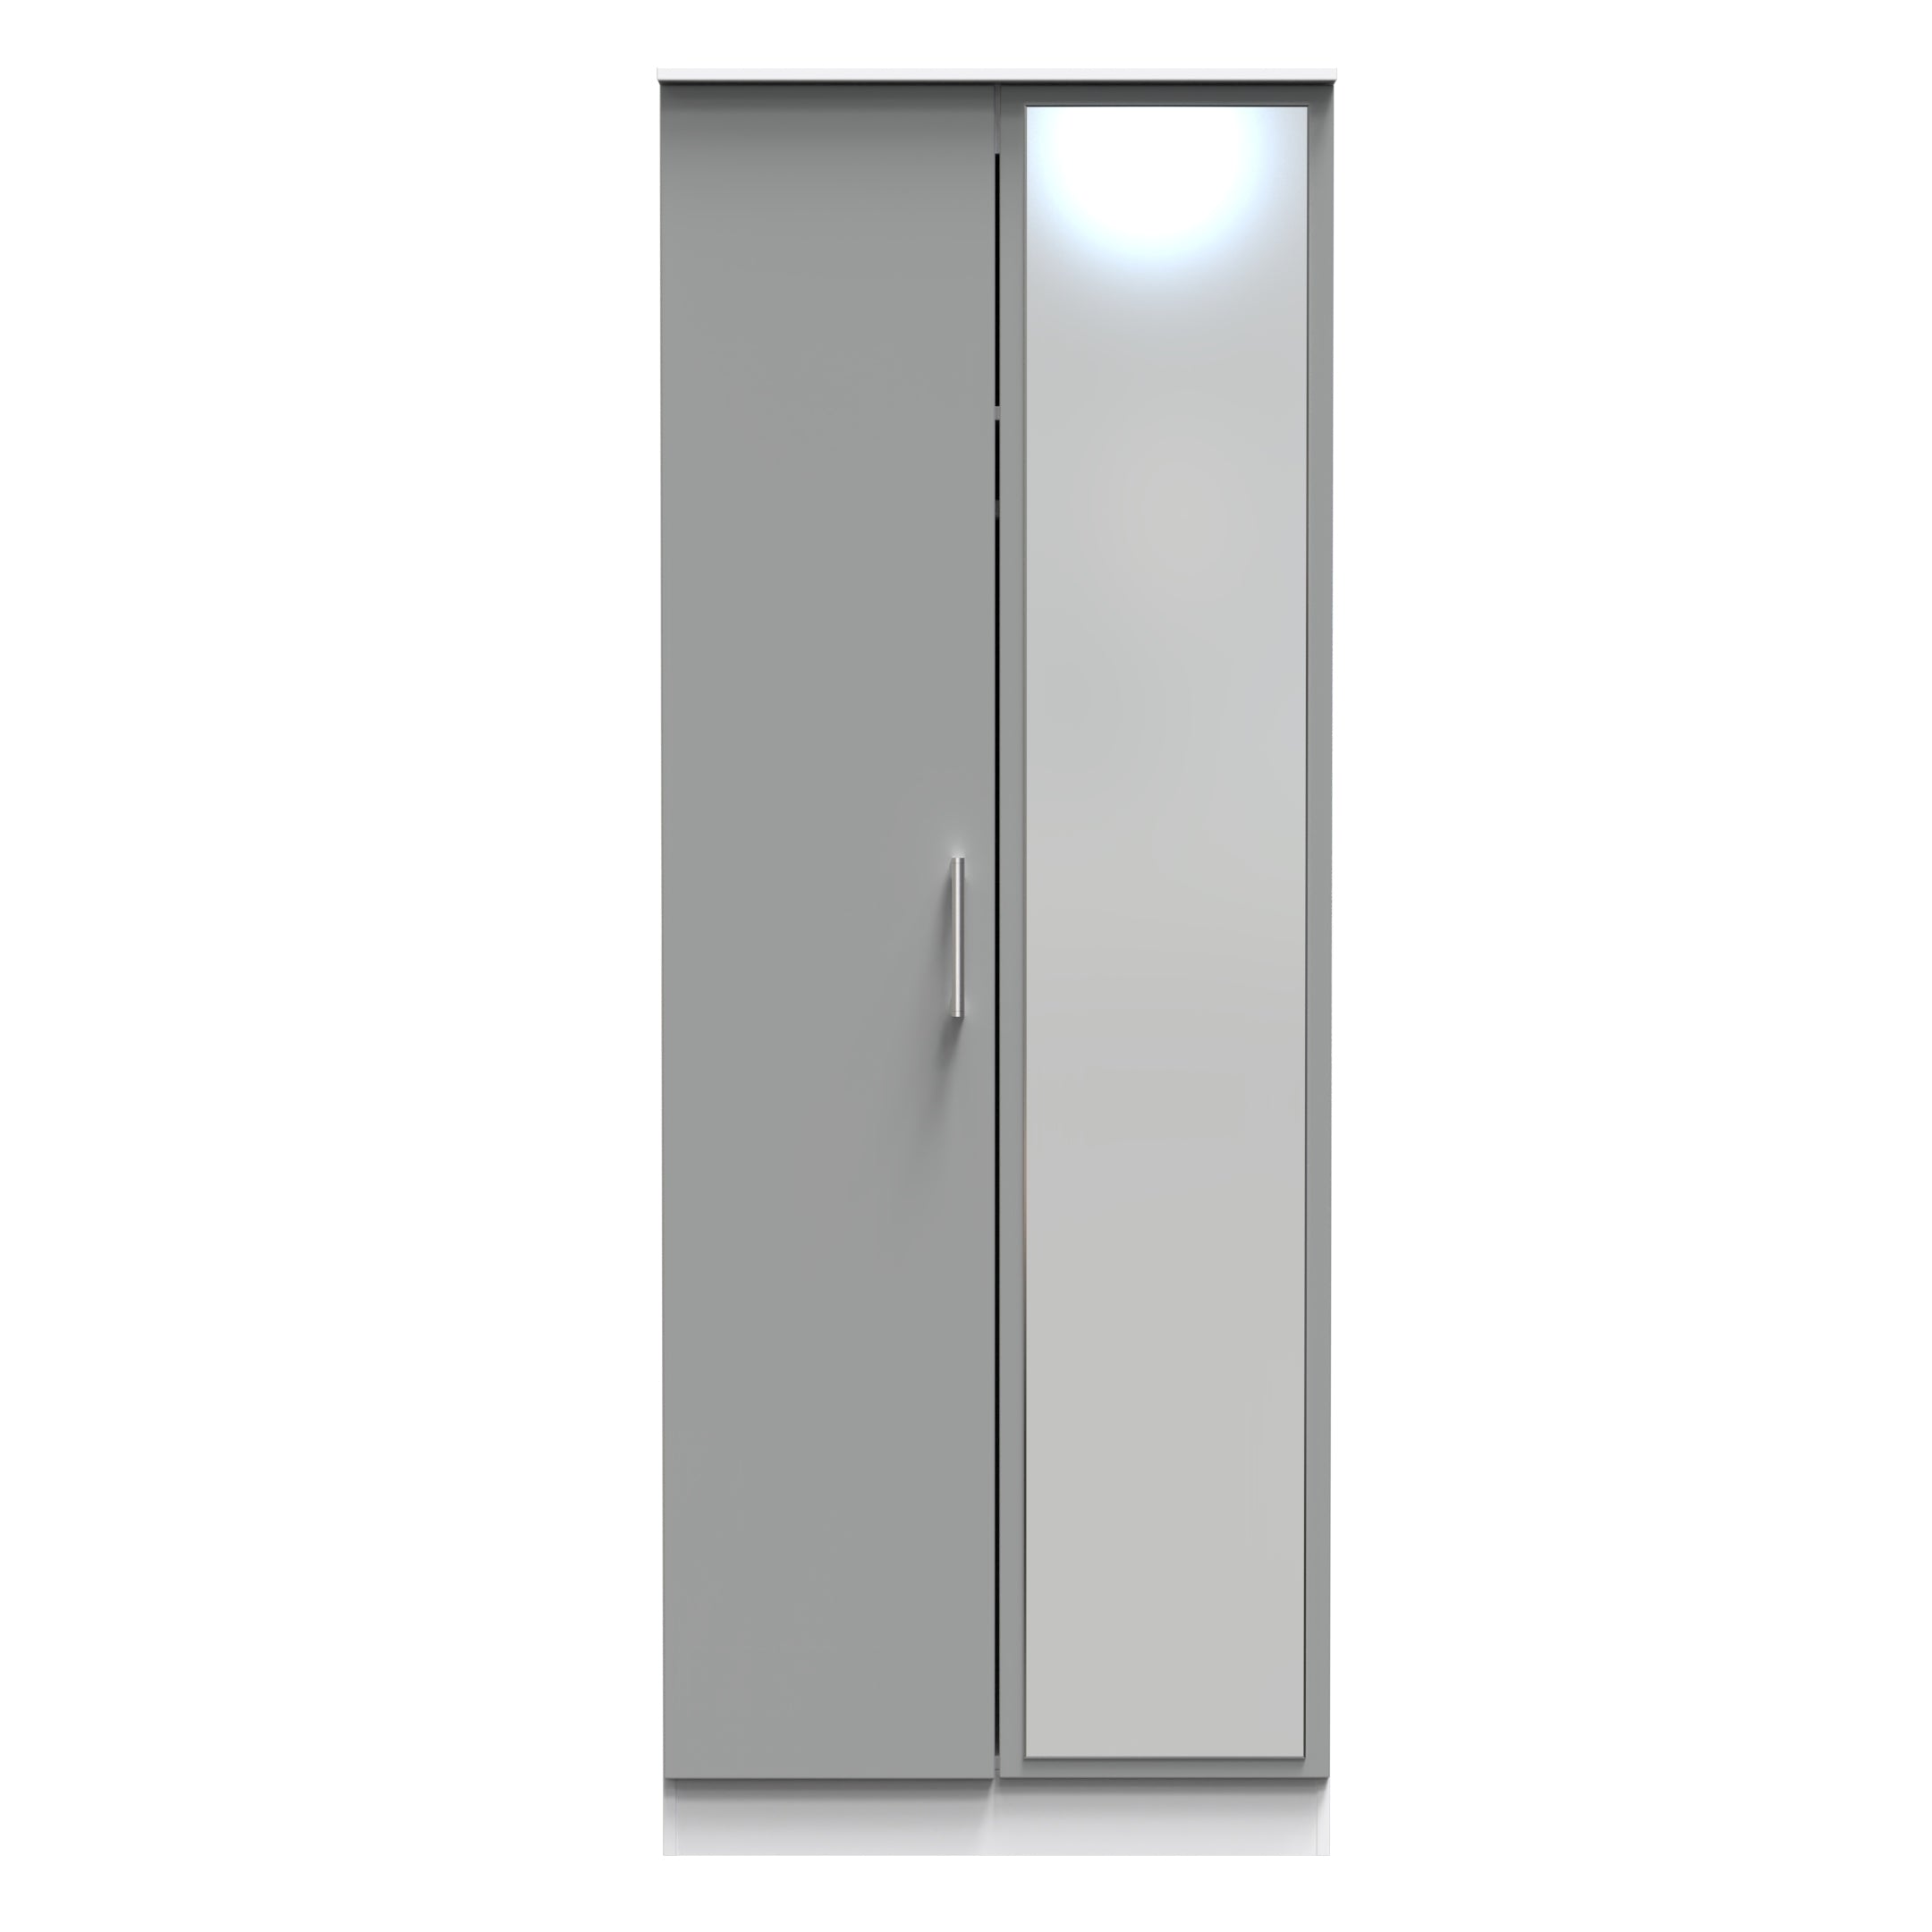 Denver Ready Assembled Wardrobe with 2 Doors and Mirror - Grey & White - Lewis’s Home  | TJ Hughes